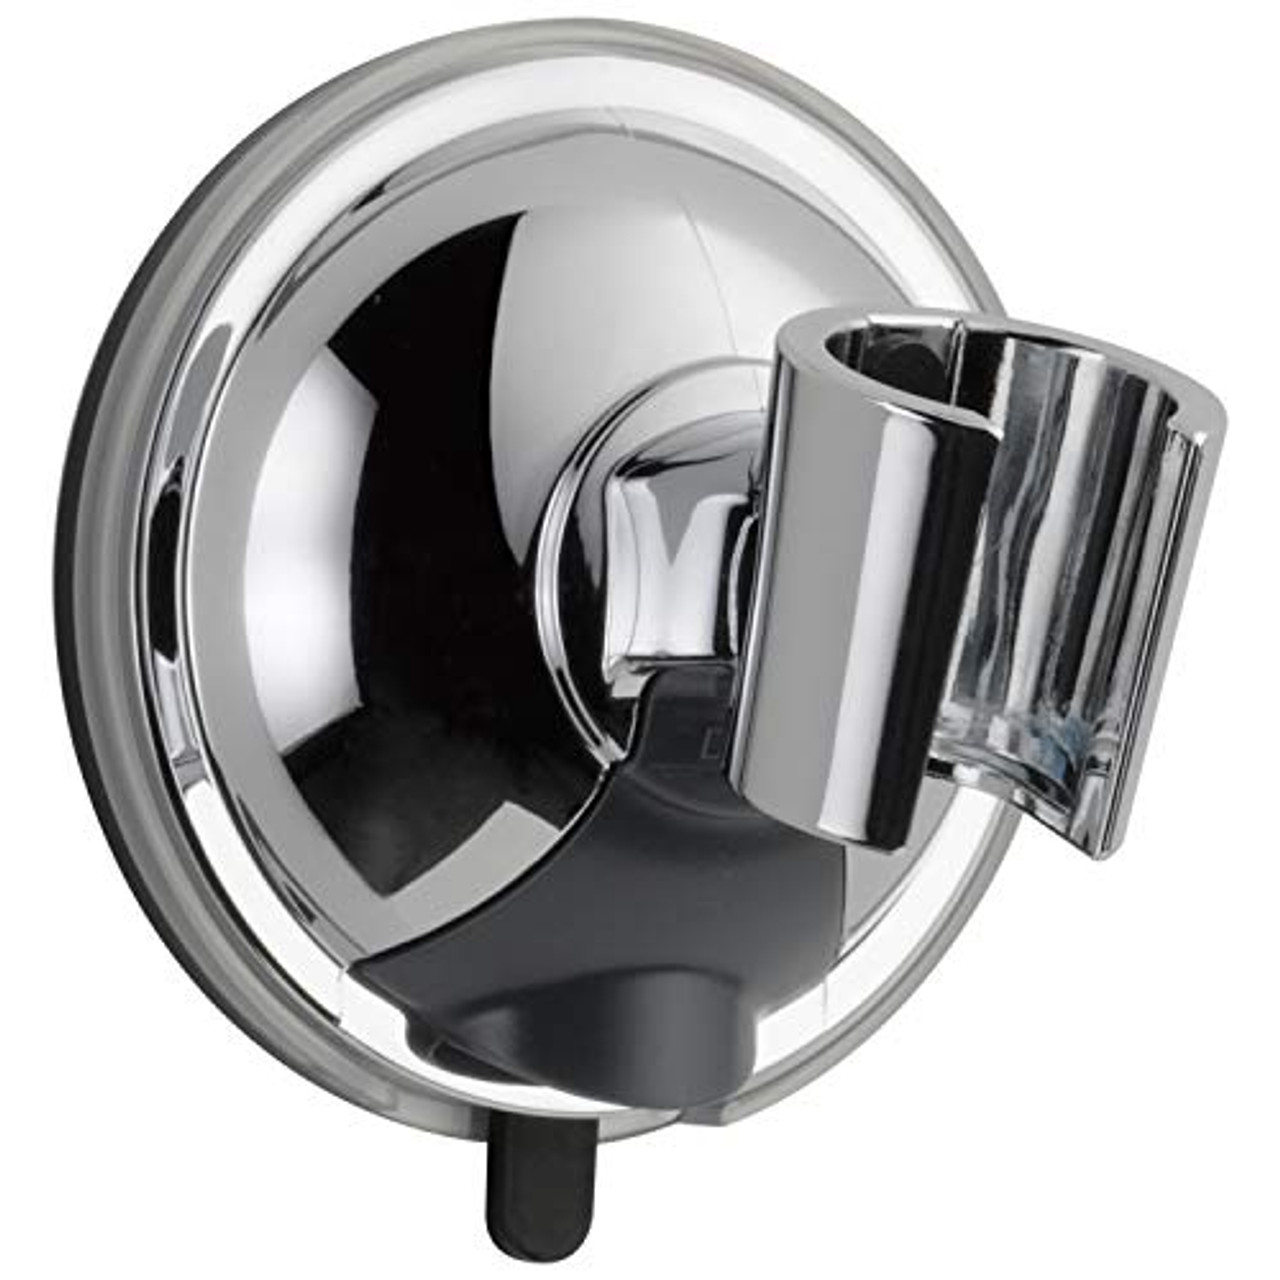 Peerless 3006C161PK Chrome Suction Cup Mount For Hand Held Shower